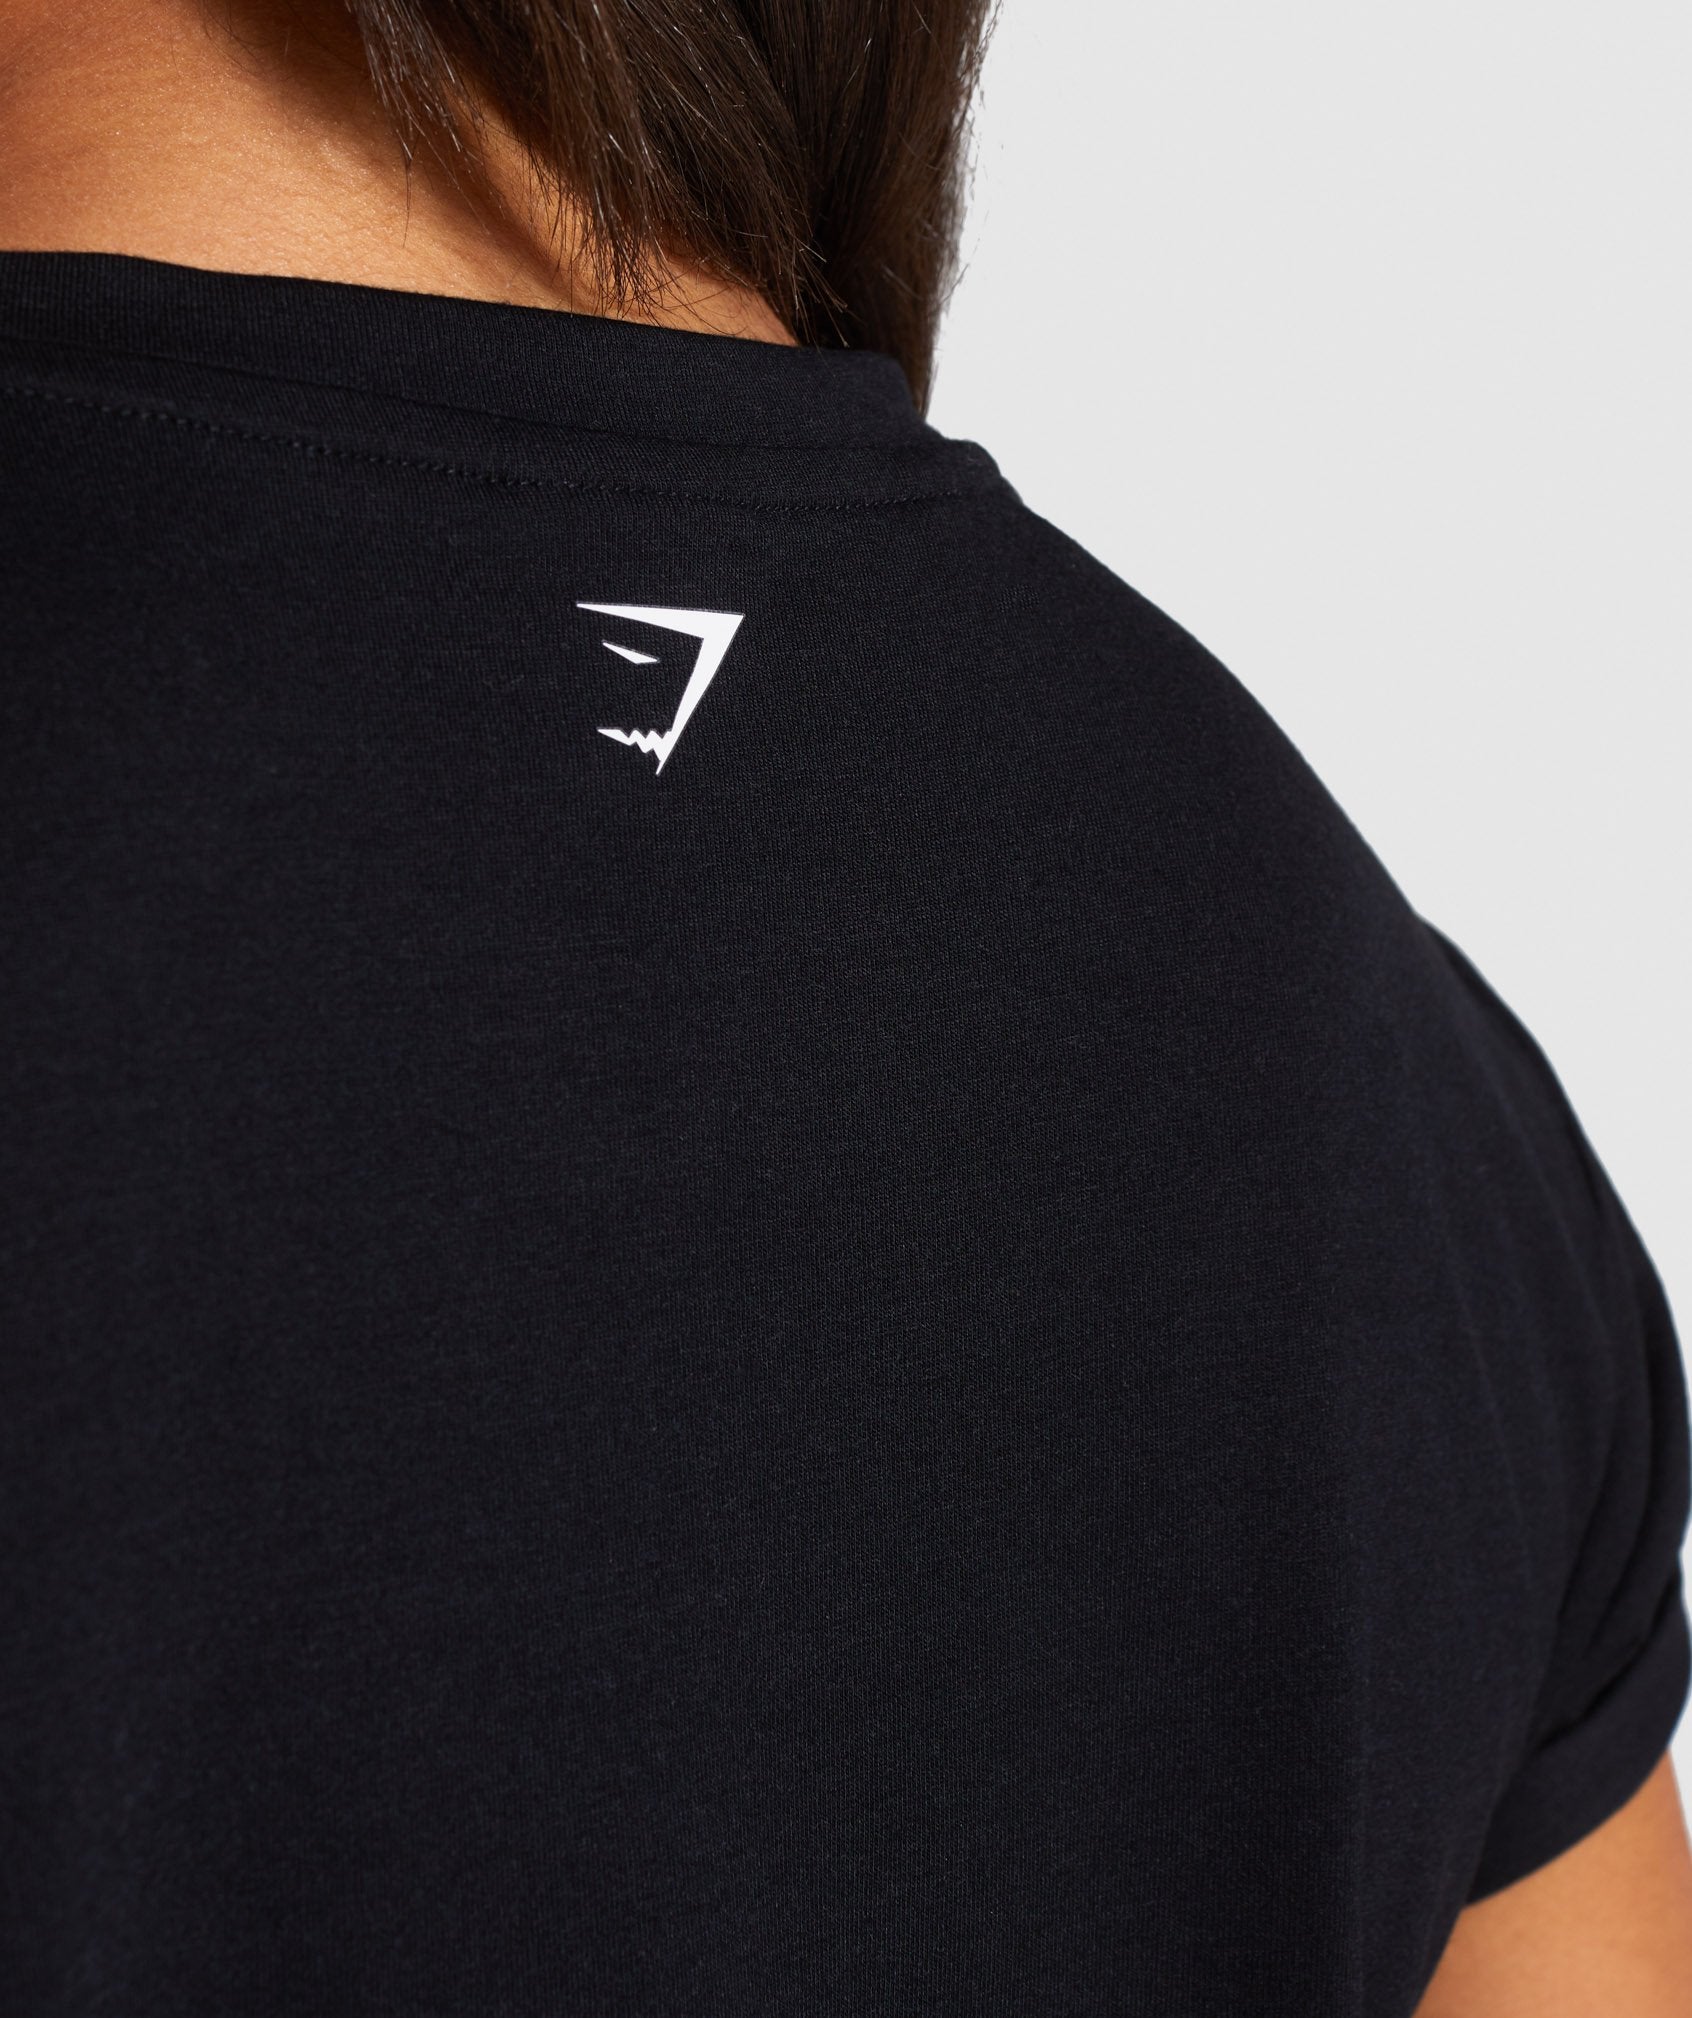 Essential Be a Visionary Tee in Black - view 5